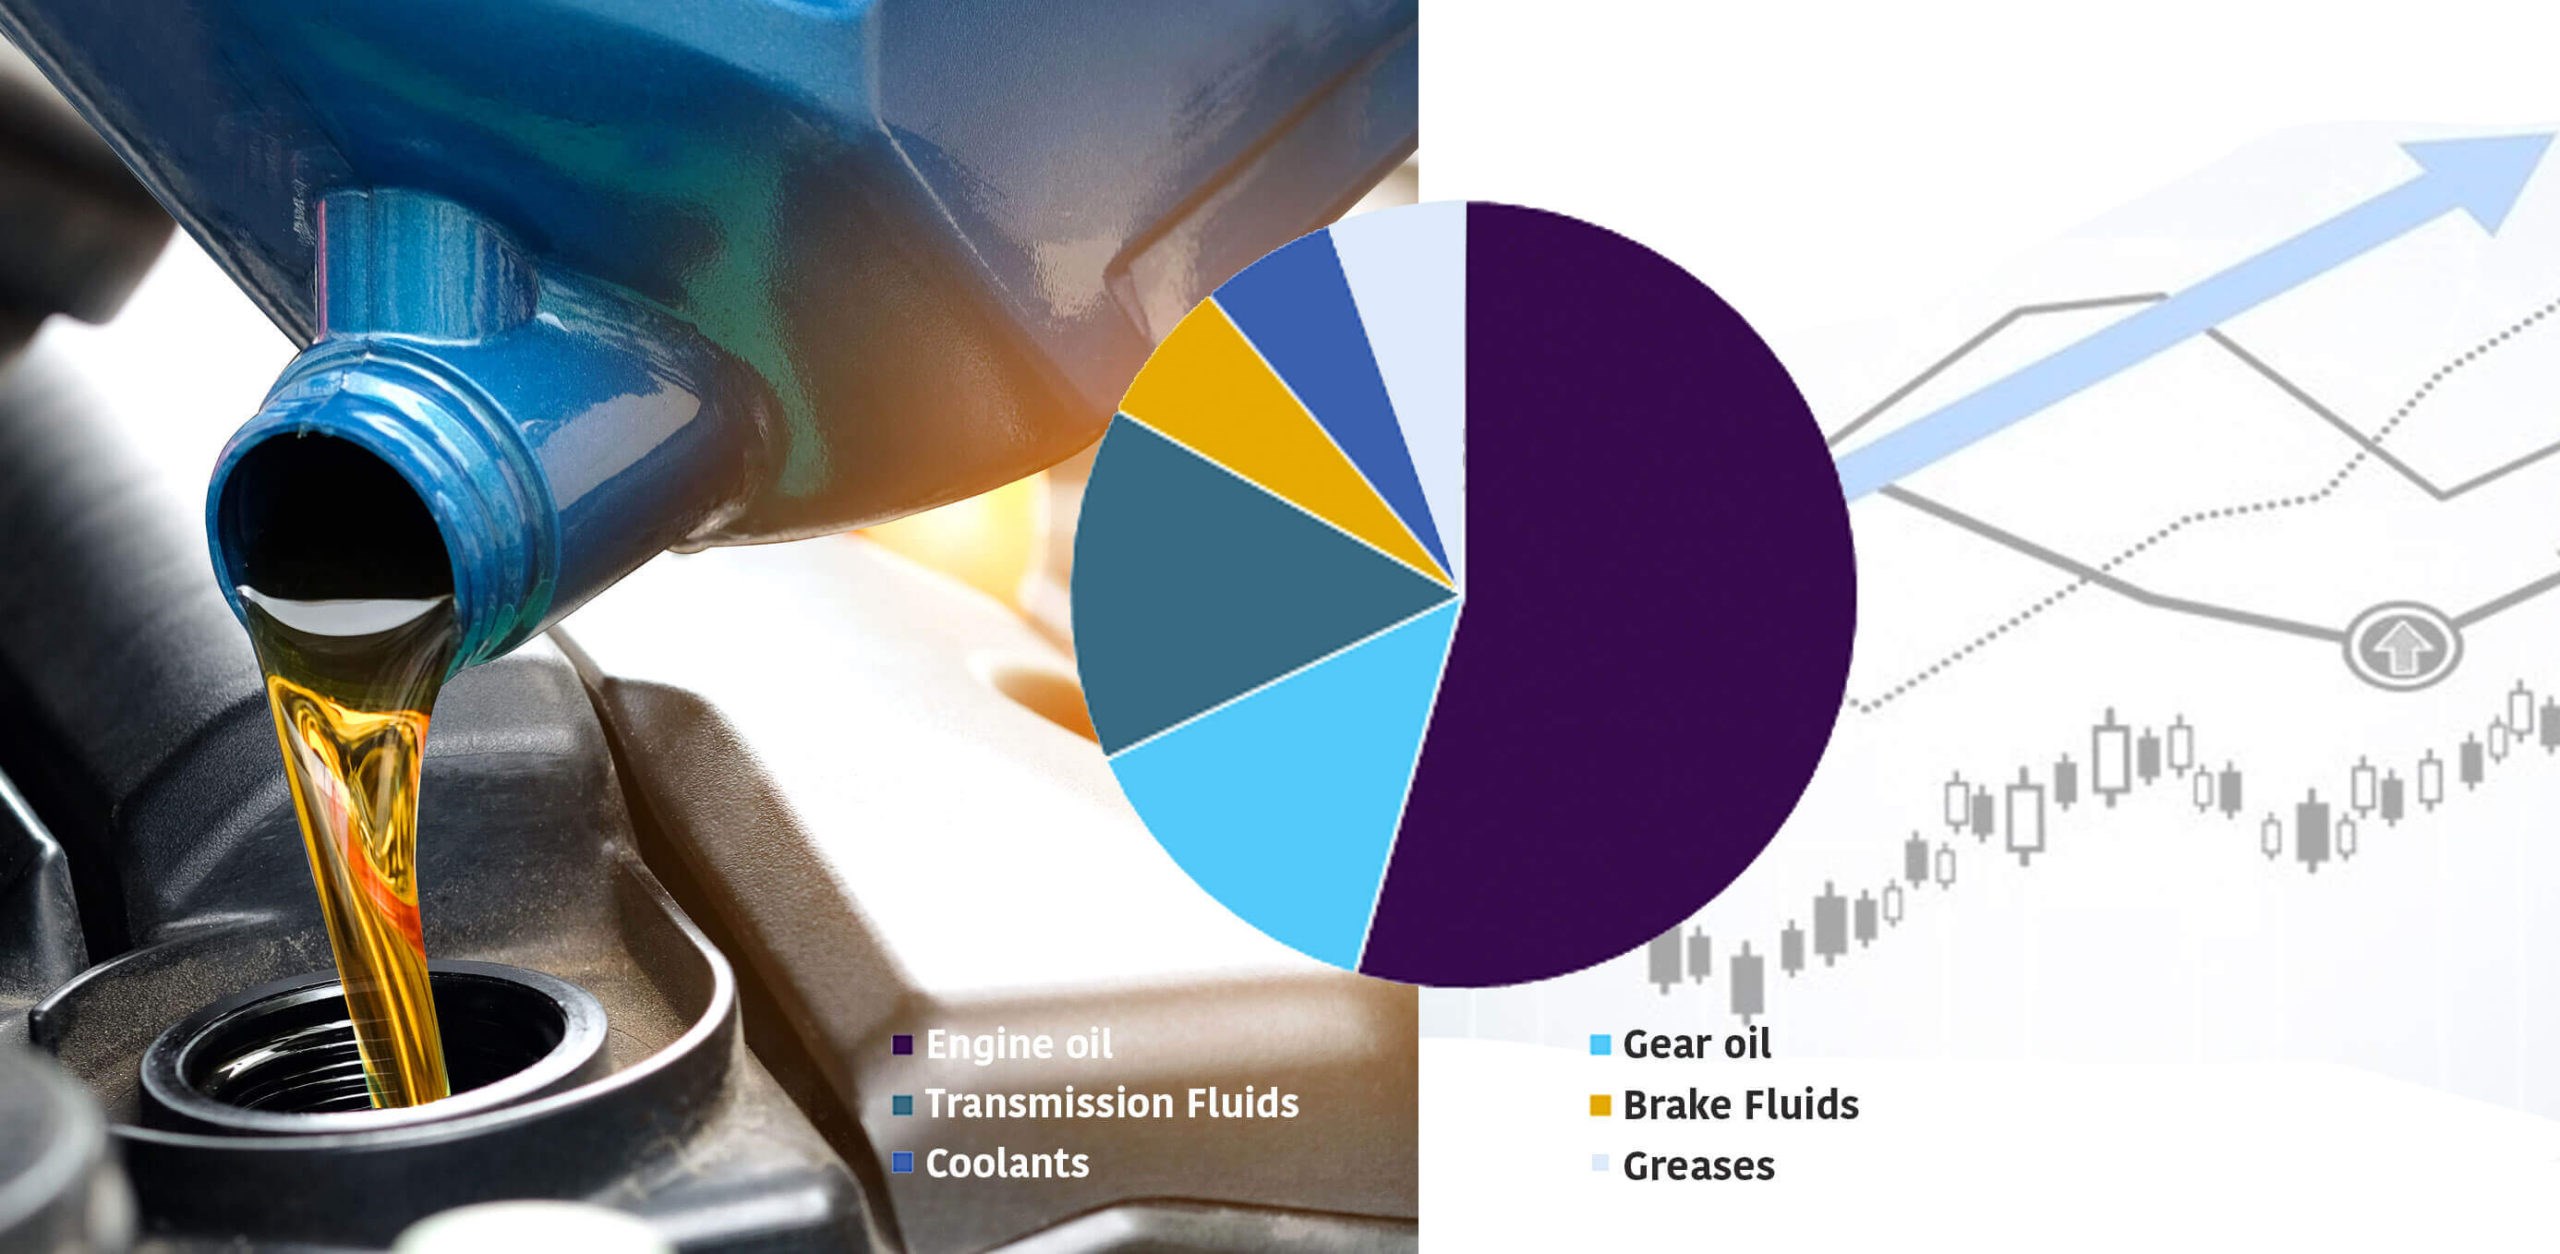 Demand Graph for Engine Lubricants, Transmission Fluids and coolant